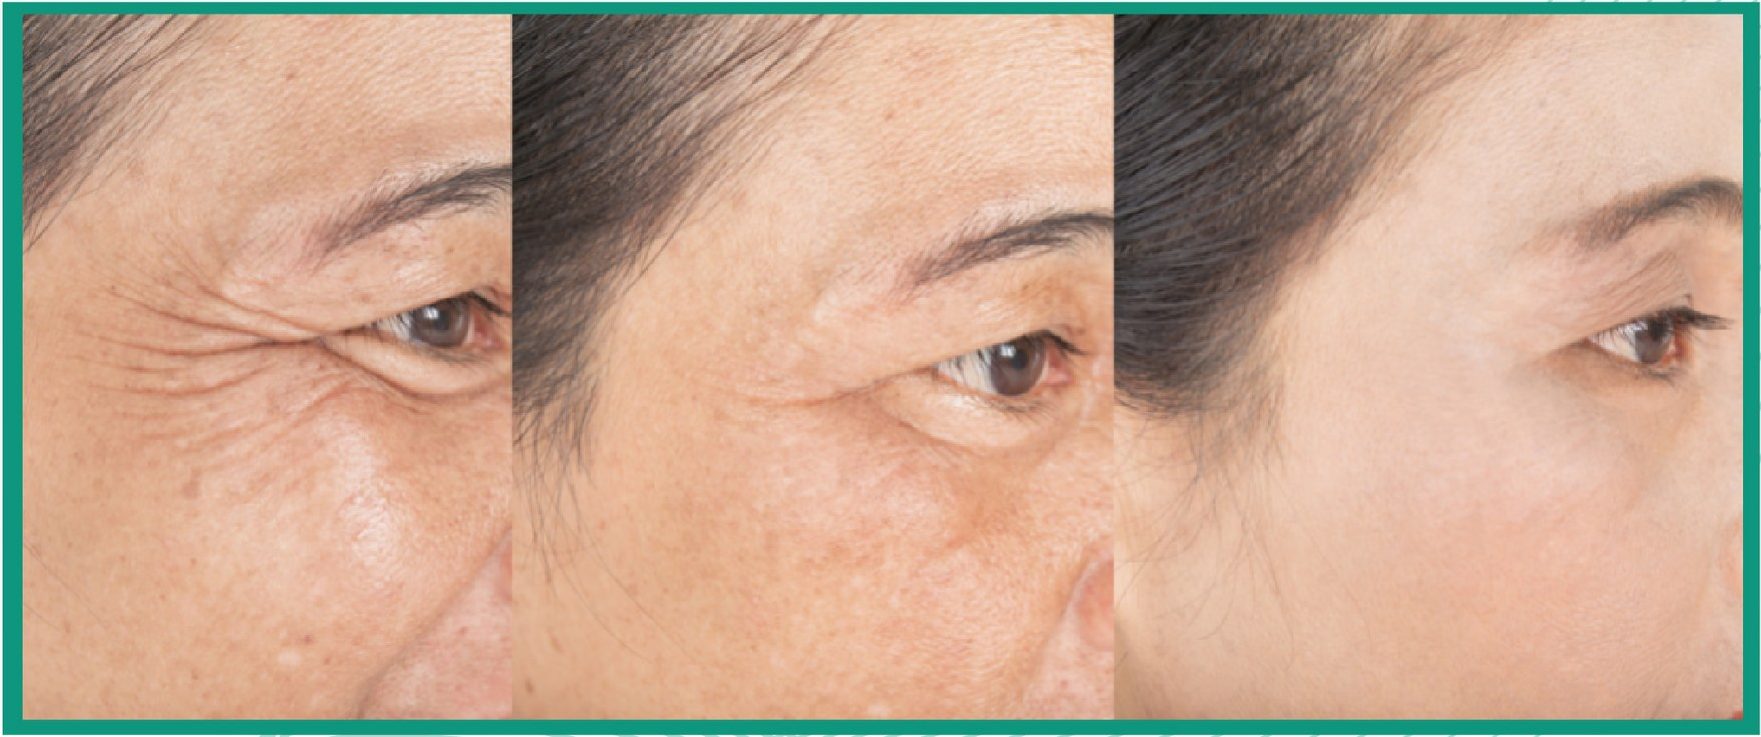 Reduced wrinkles as botox treatment's results in aesthetic clinic